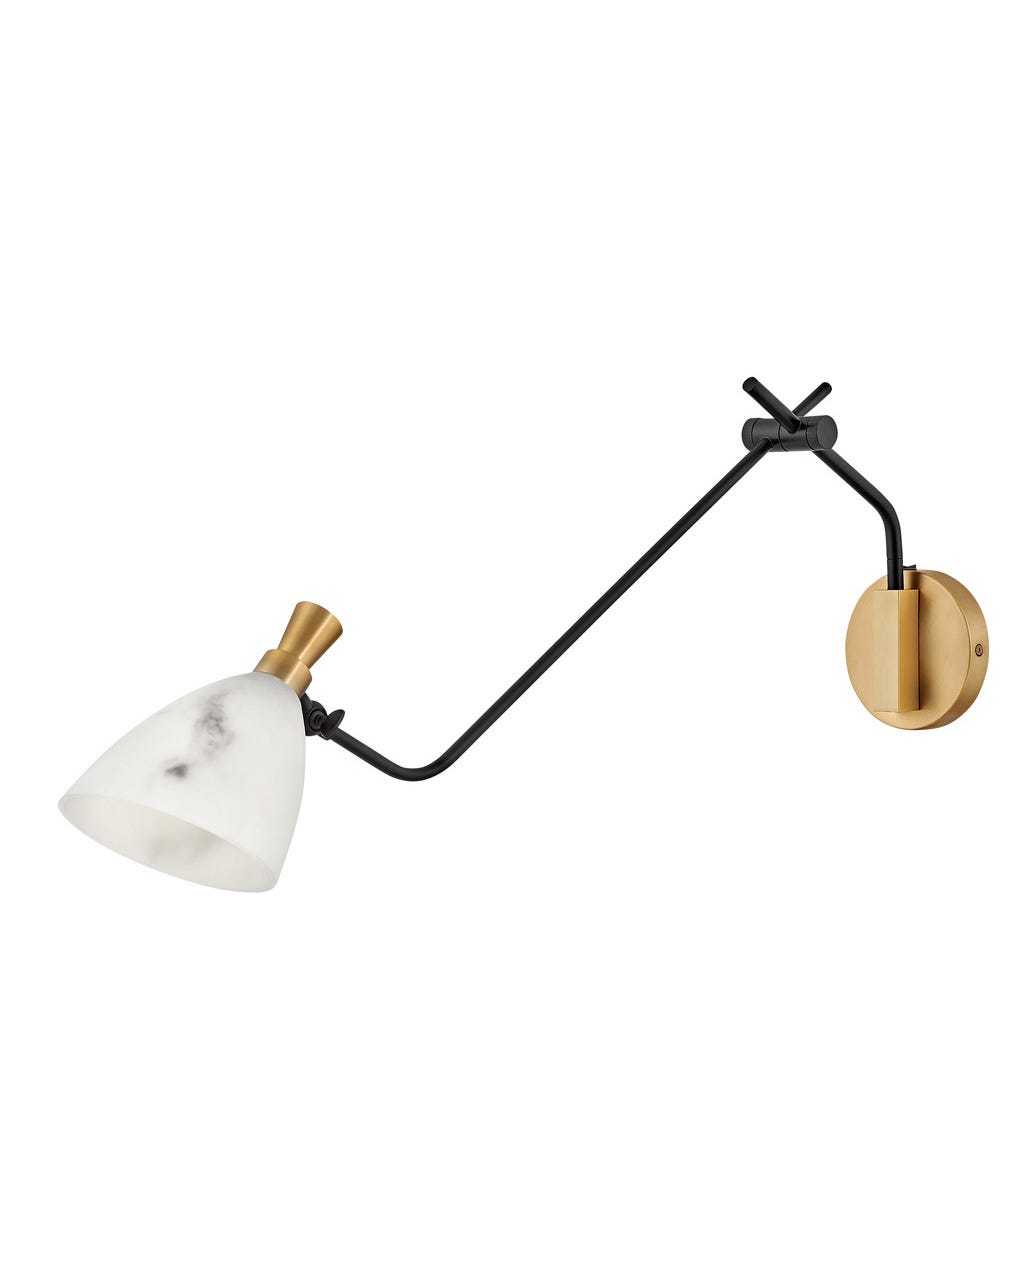 Hinkley Sinclair Sconce Sconce Hinkley Heritage Brass 30.0x5.25x29.75 